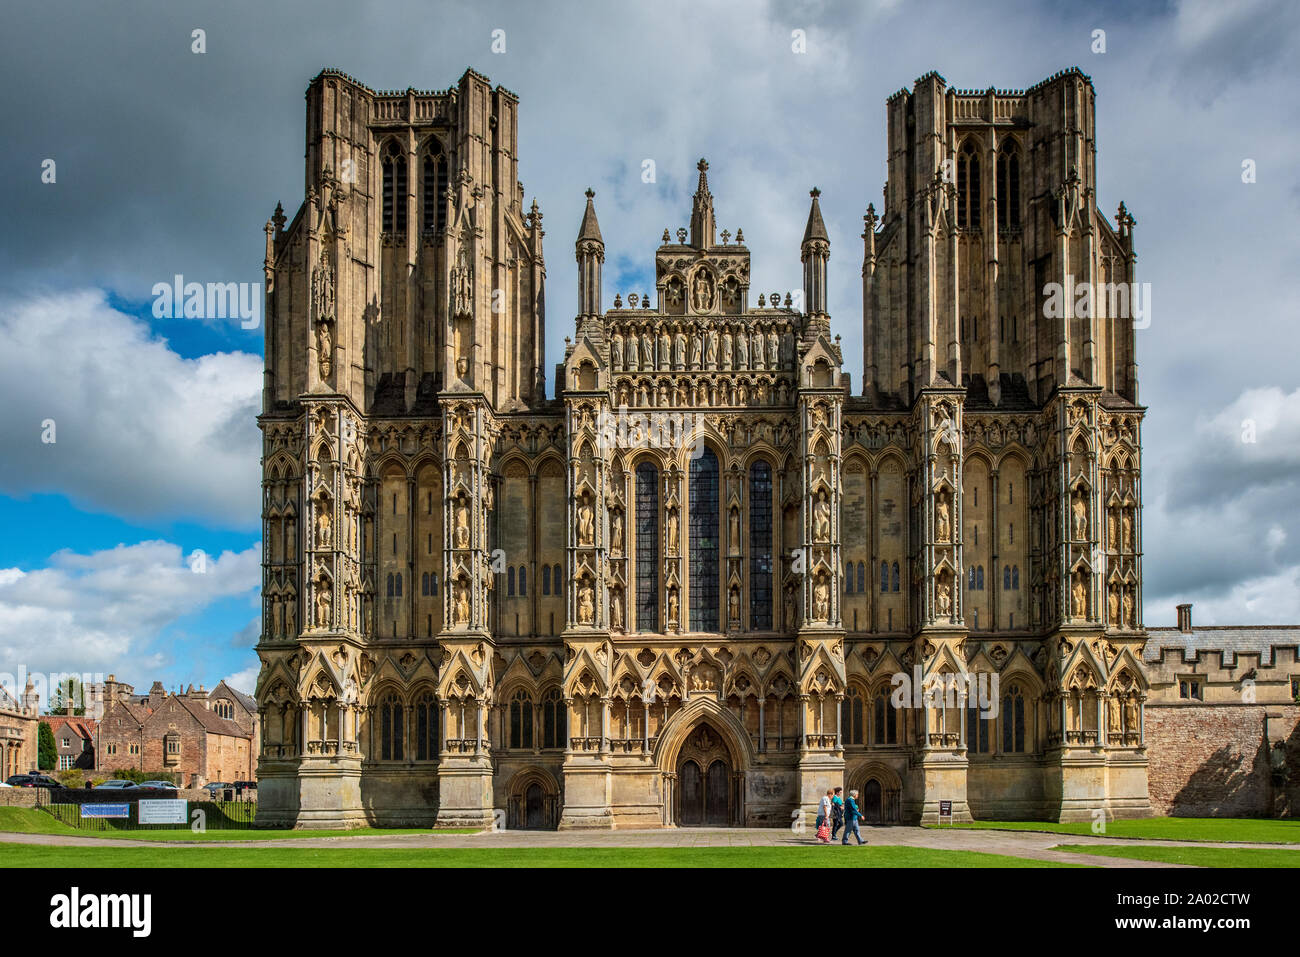 Wells Cathedral West Front. Wells Cathedral a Wells Somerset, costruita tra il 1176 e il 1450. Anglicano. Il fronte Ovest. Foto Stock